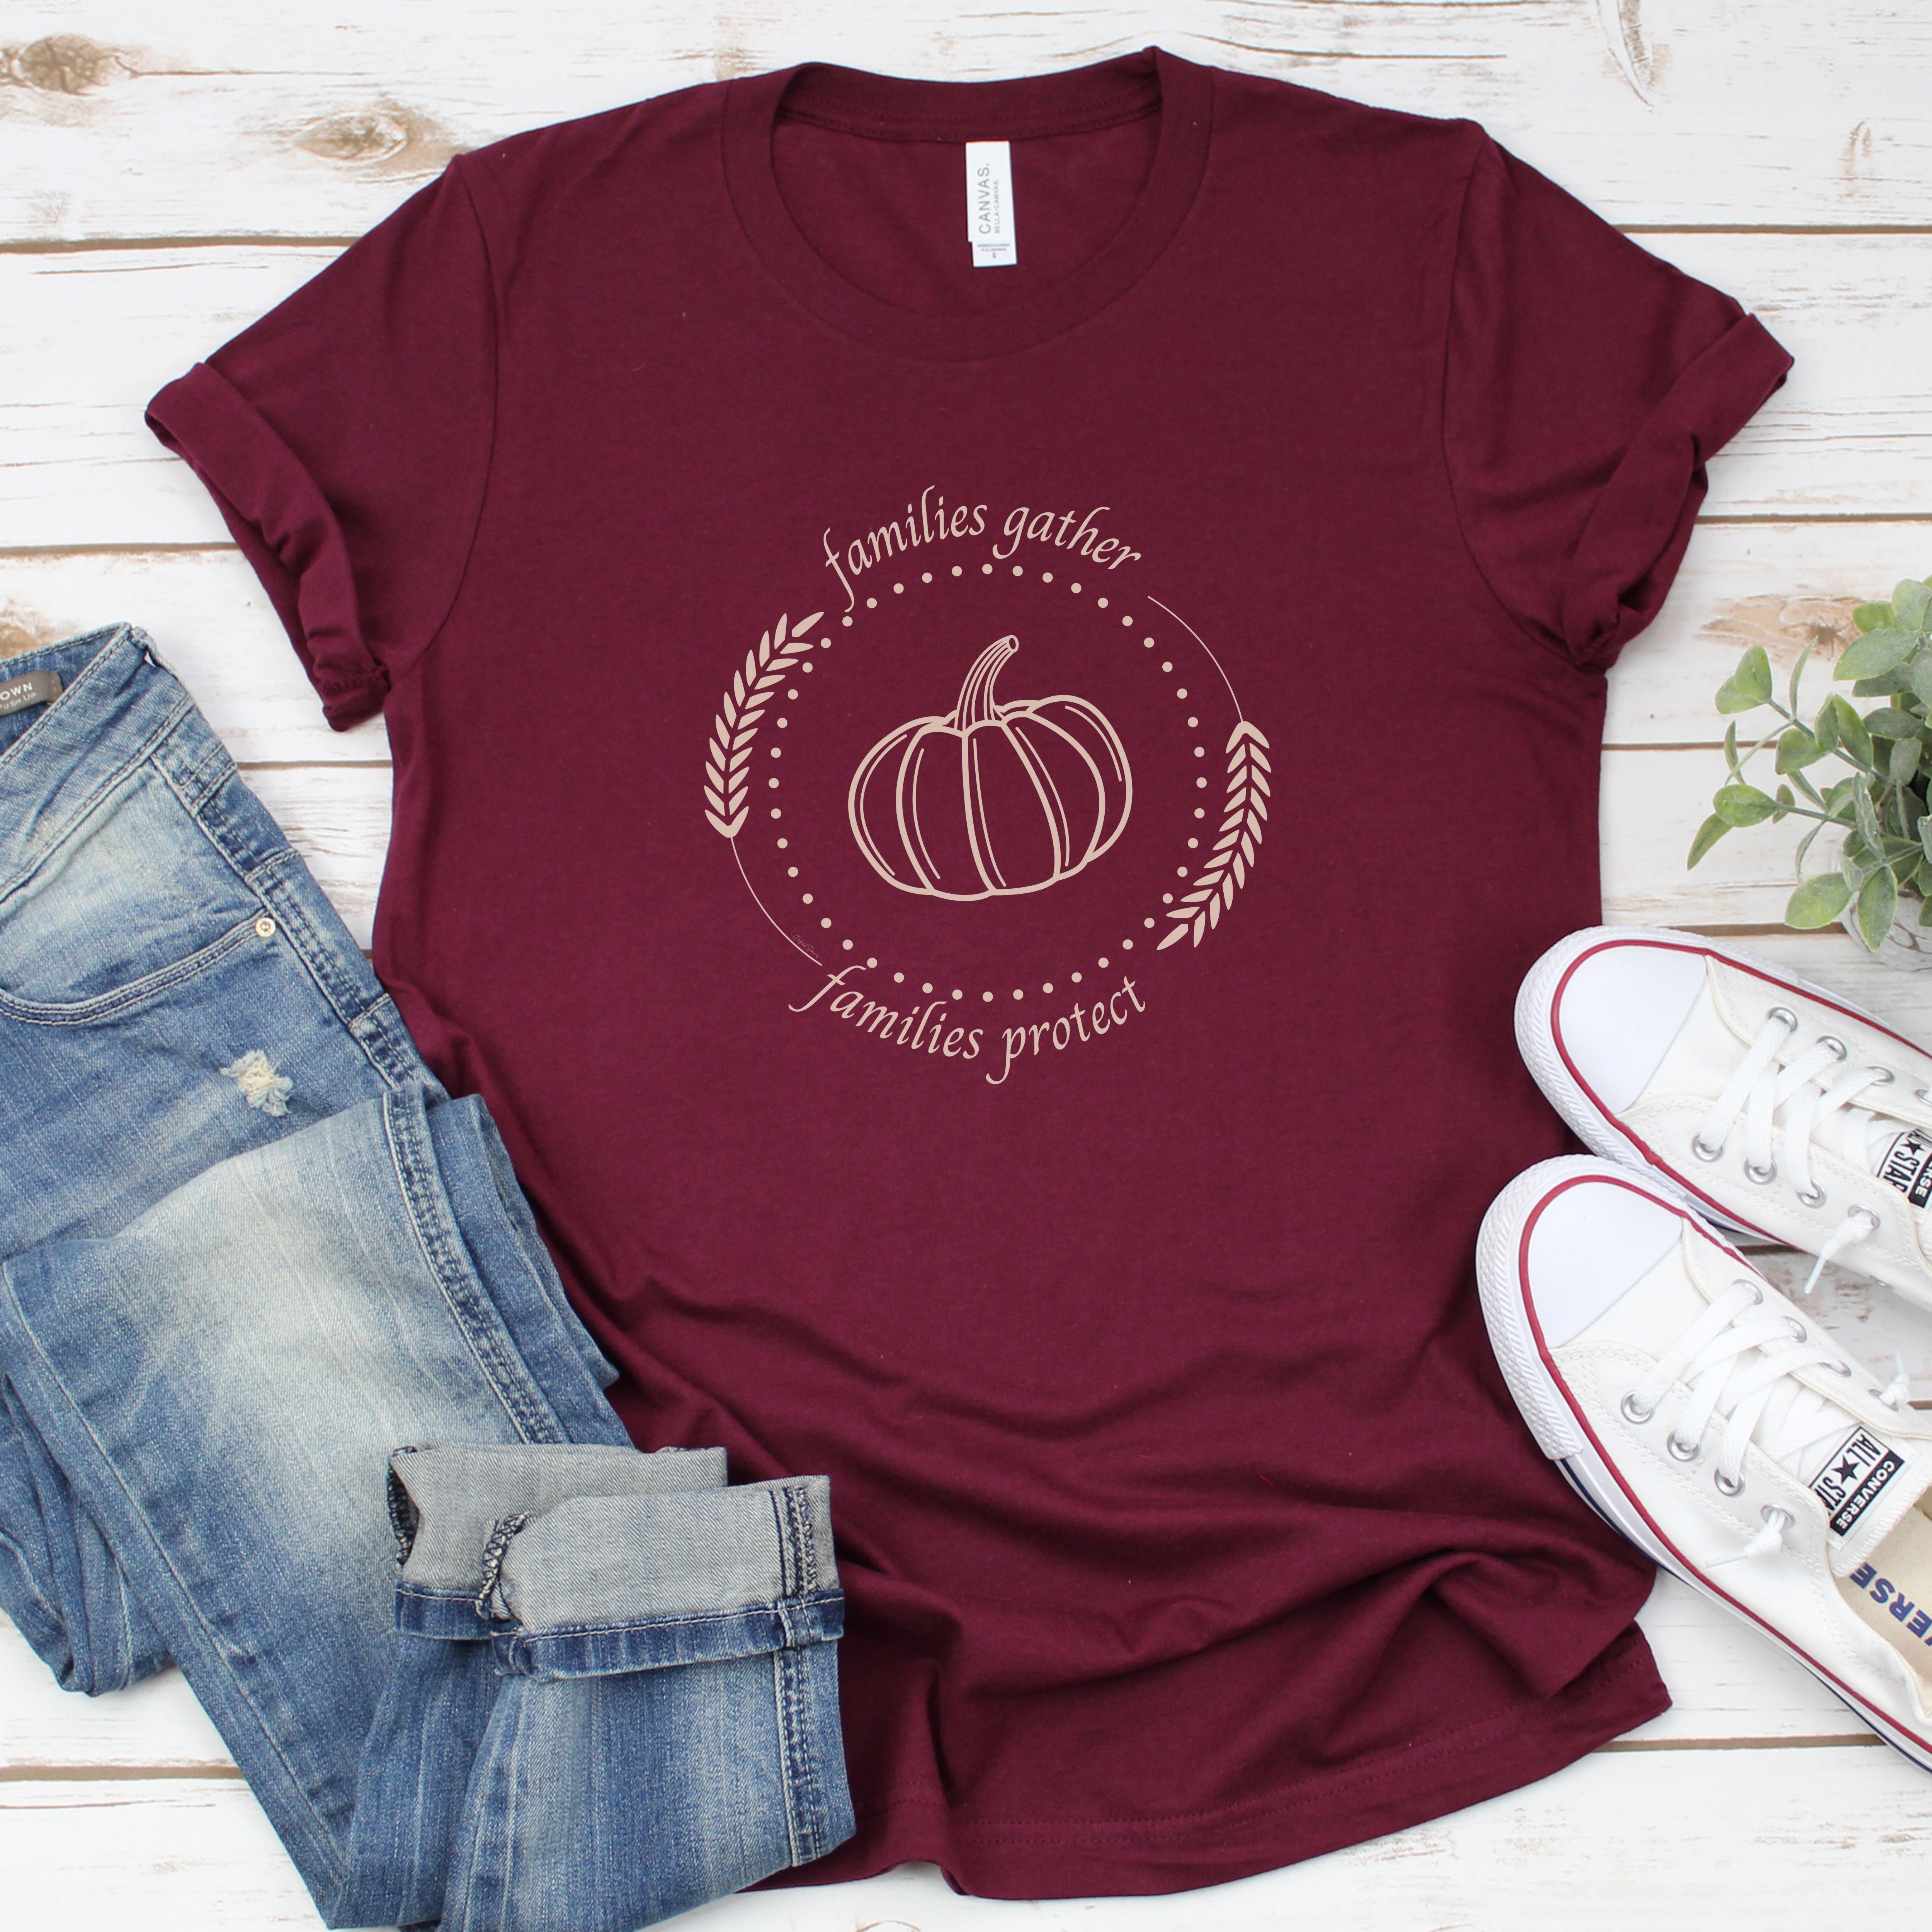 Adorned with a heartwarming autumn-fall harvest pumpkin graphic and the inspiring message Families Gather, Families Protect, this T-shirt stands as a testament to the unwavering support and protection families should offer to survivors.